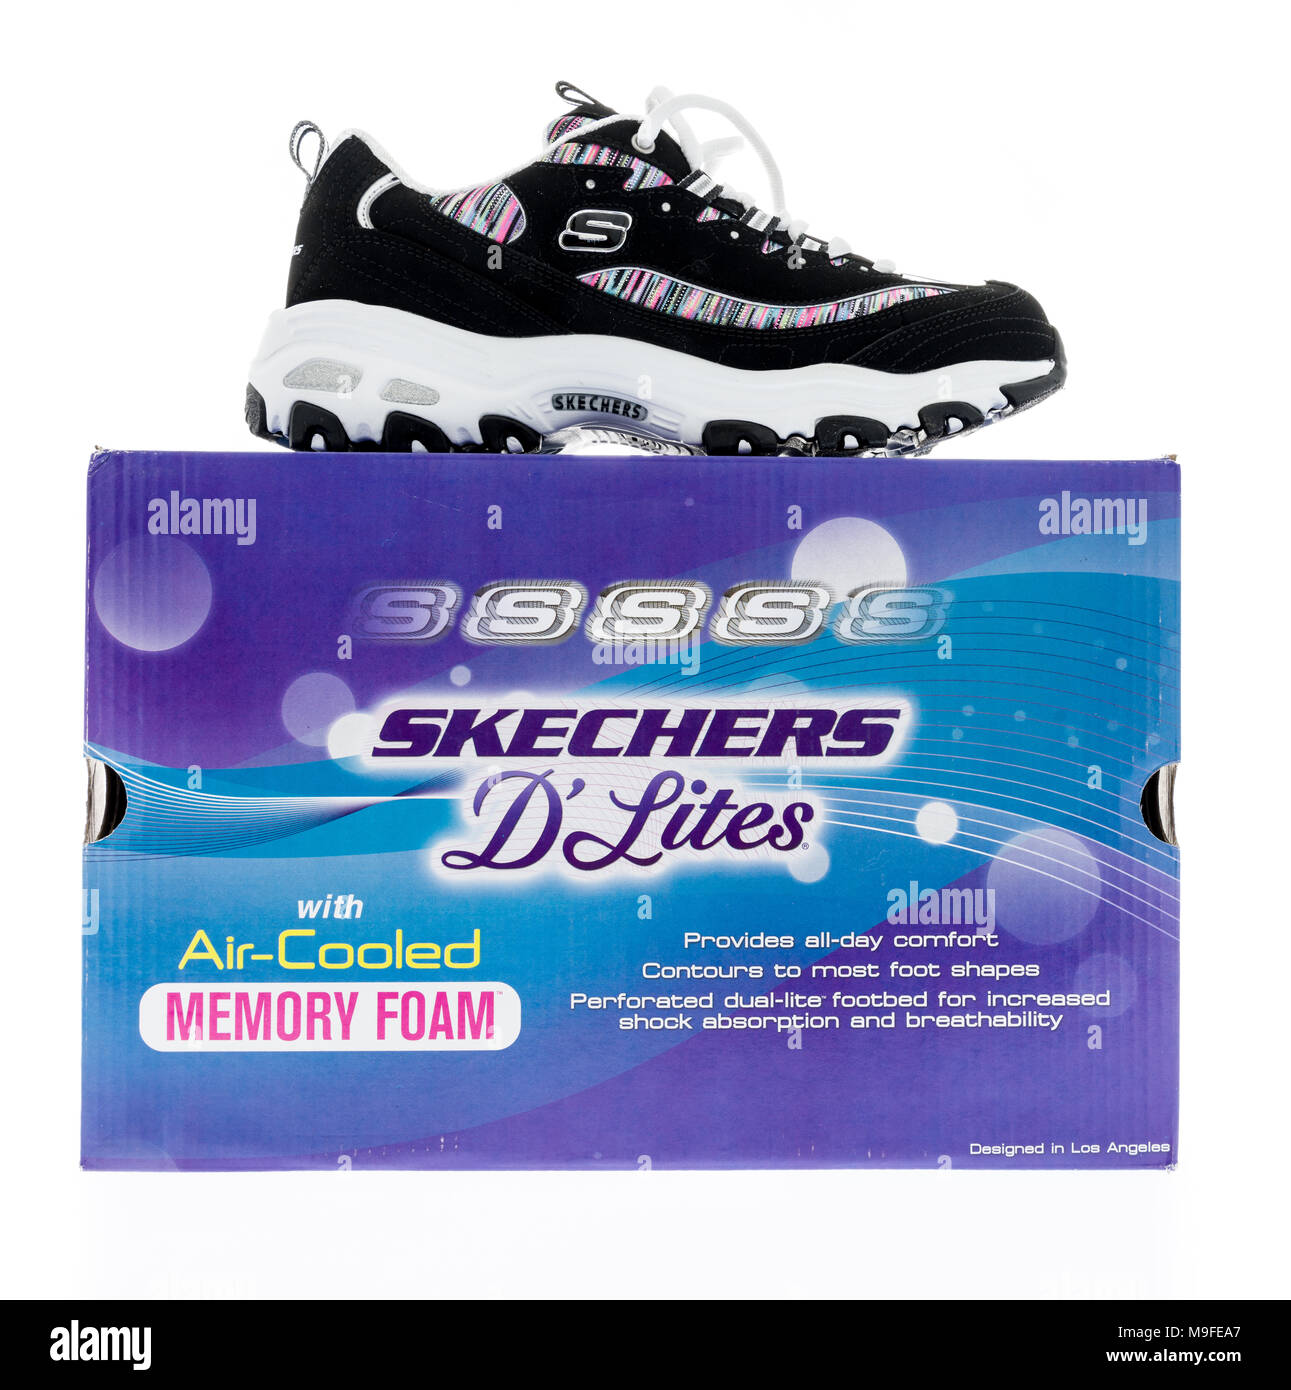 Buy > skechers shoes with wheels > in stock